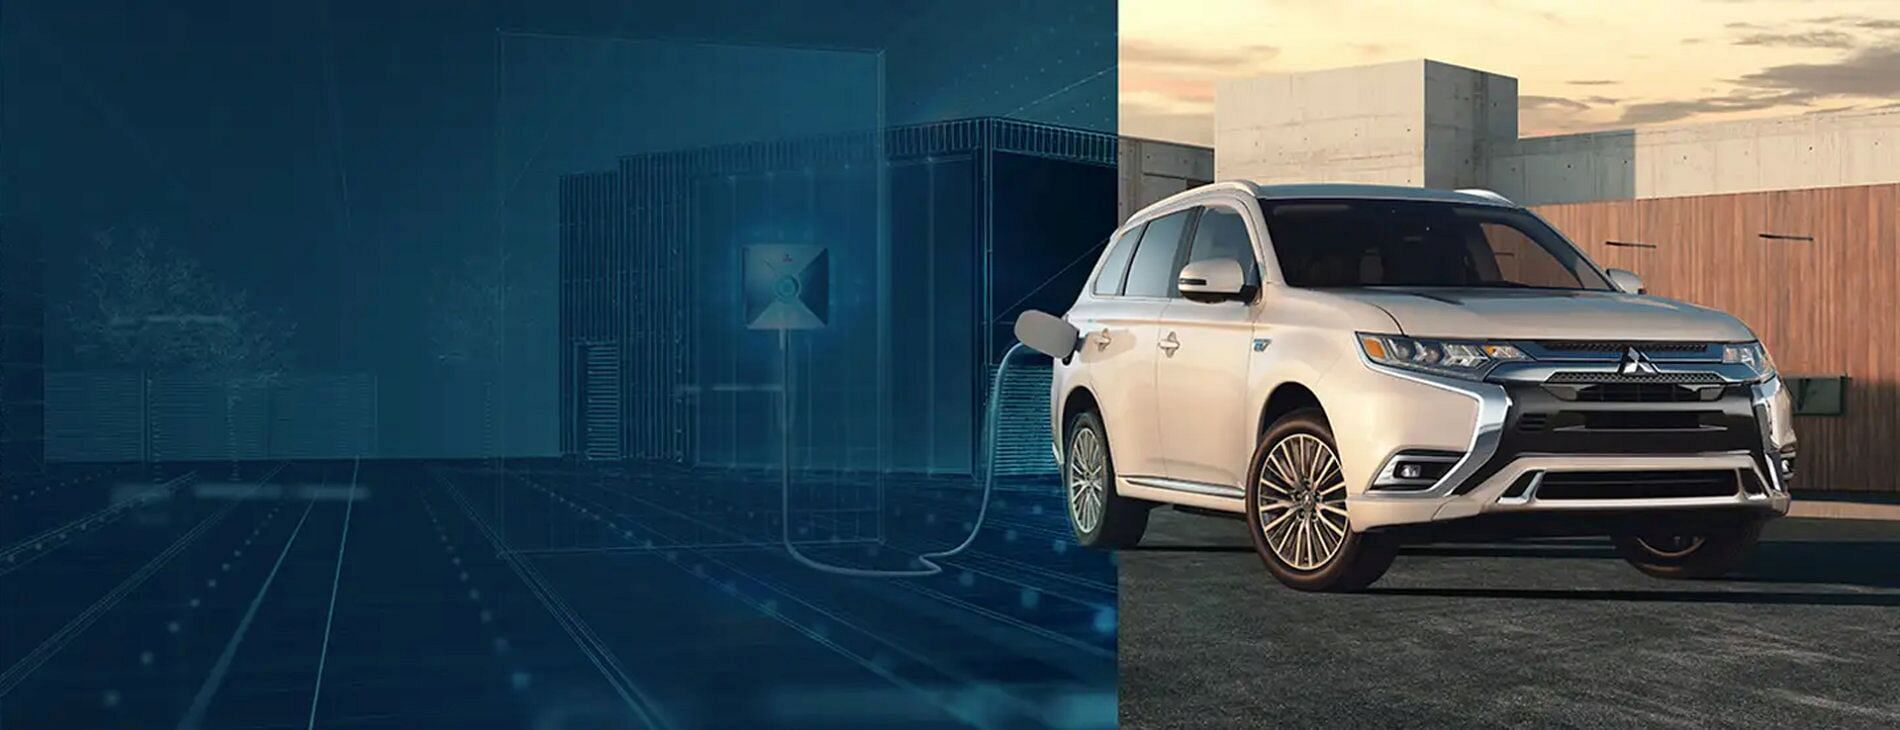 2021 Outlander Plug-in Hybrid plugged in to a charger - Mitsubishi has focused on Plug-in Hybrid Electric Vehicle technology—pushing the boundaries of what’s possible with hybrids